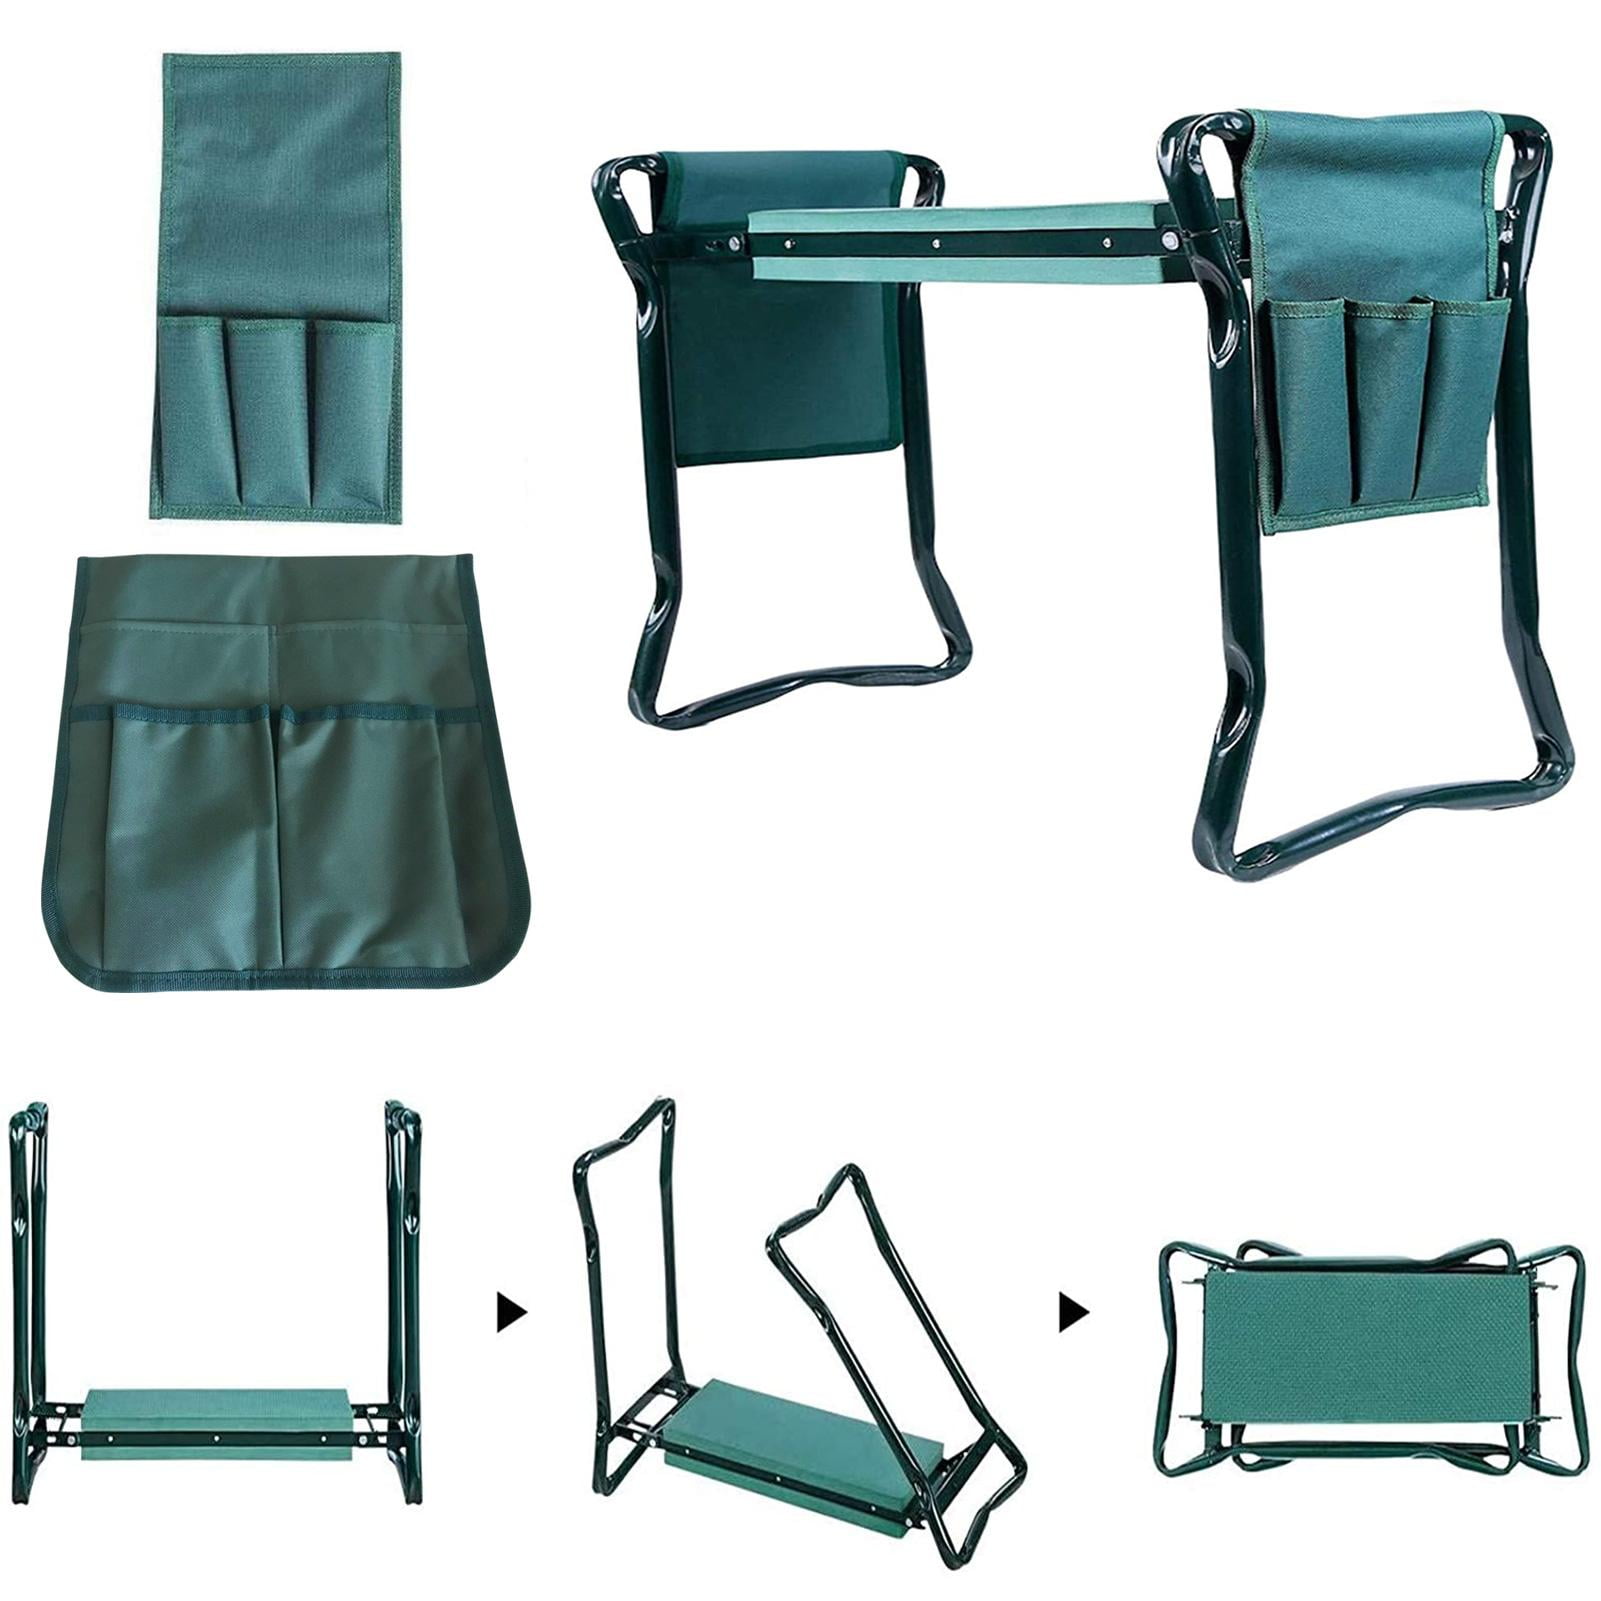 Details about   Foldable Garden Kneeling Stool Pad and Seat w/handles 